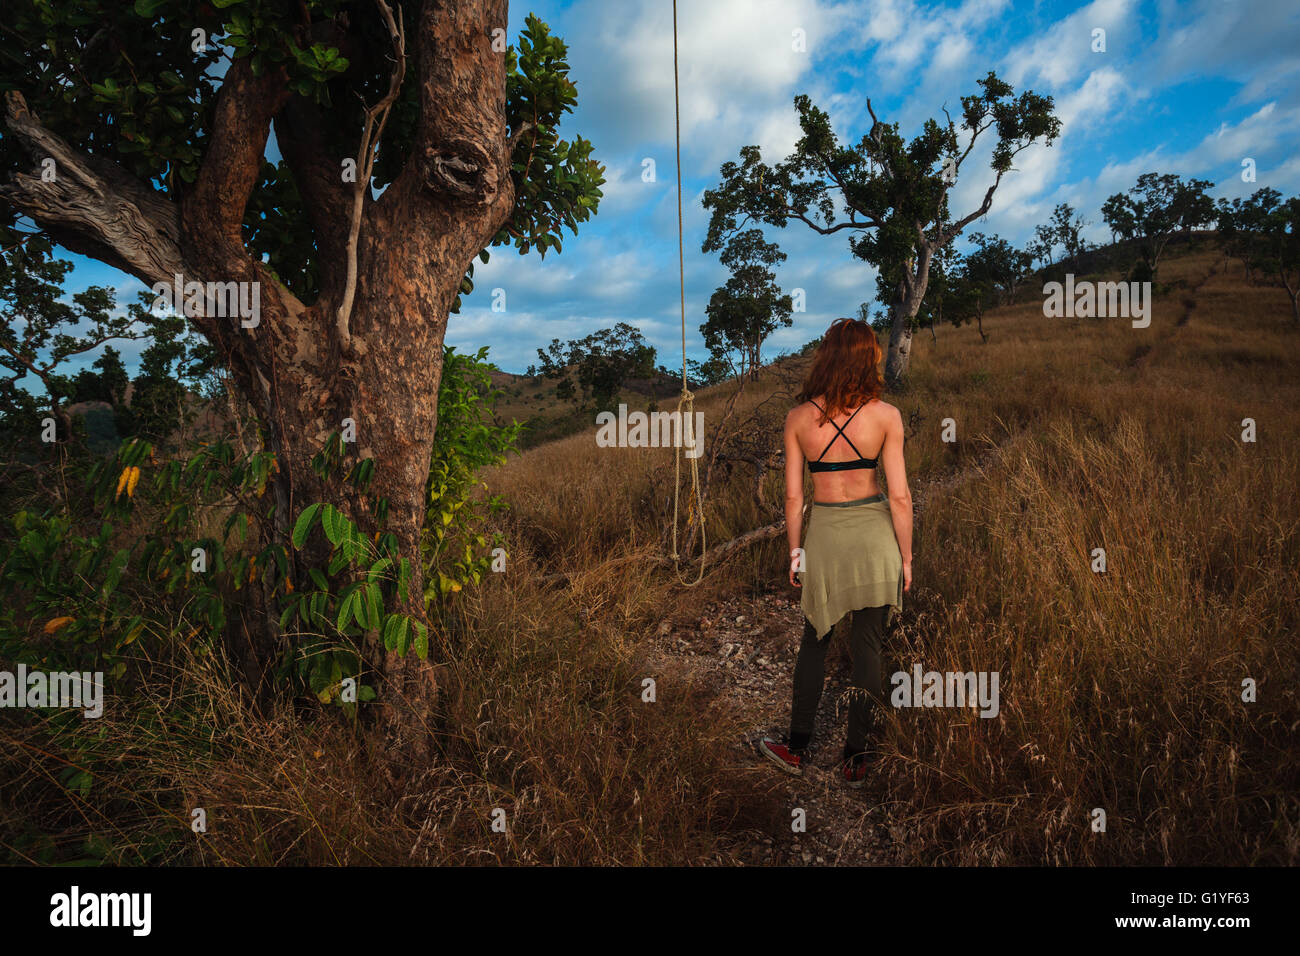 A young woman is standing next to a rope hanging from a tree on a hill Stock Photo